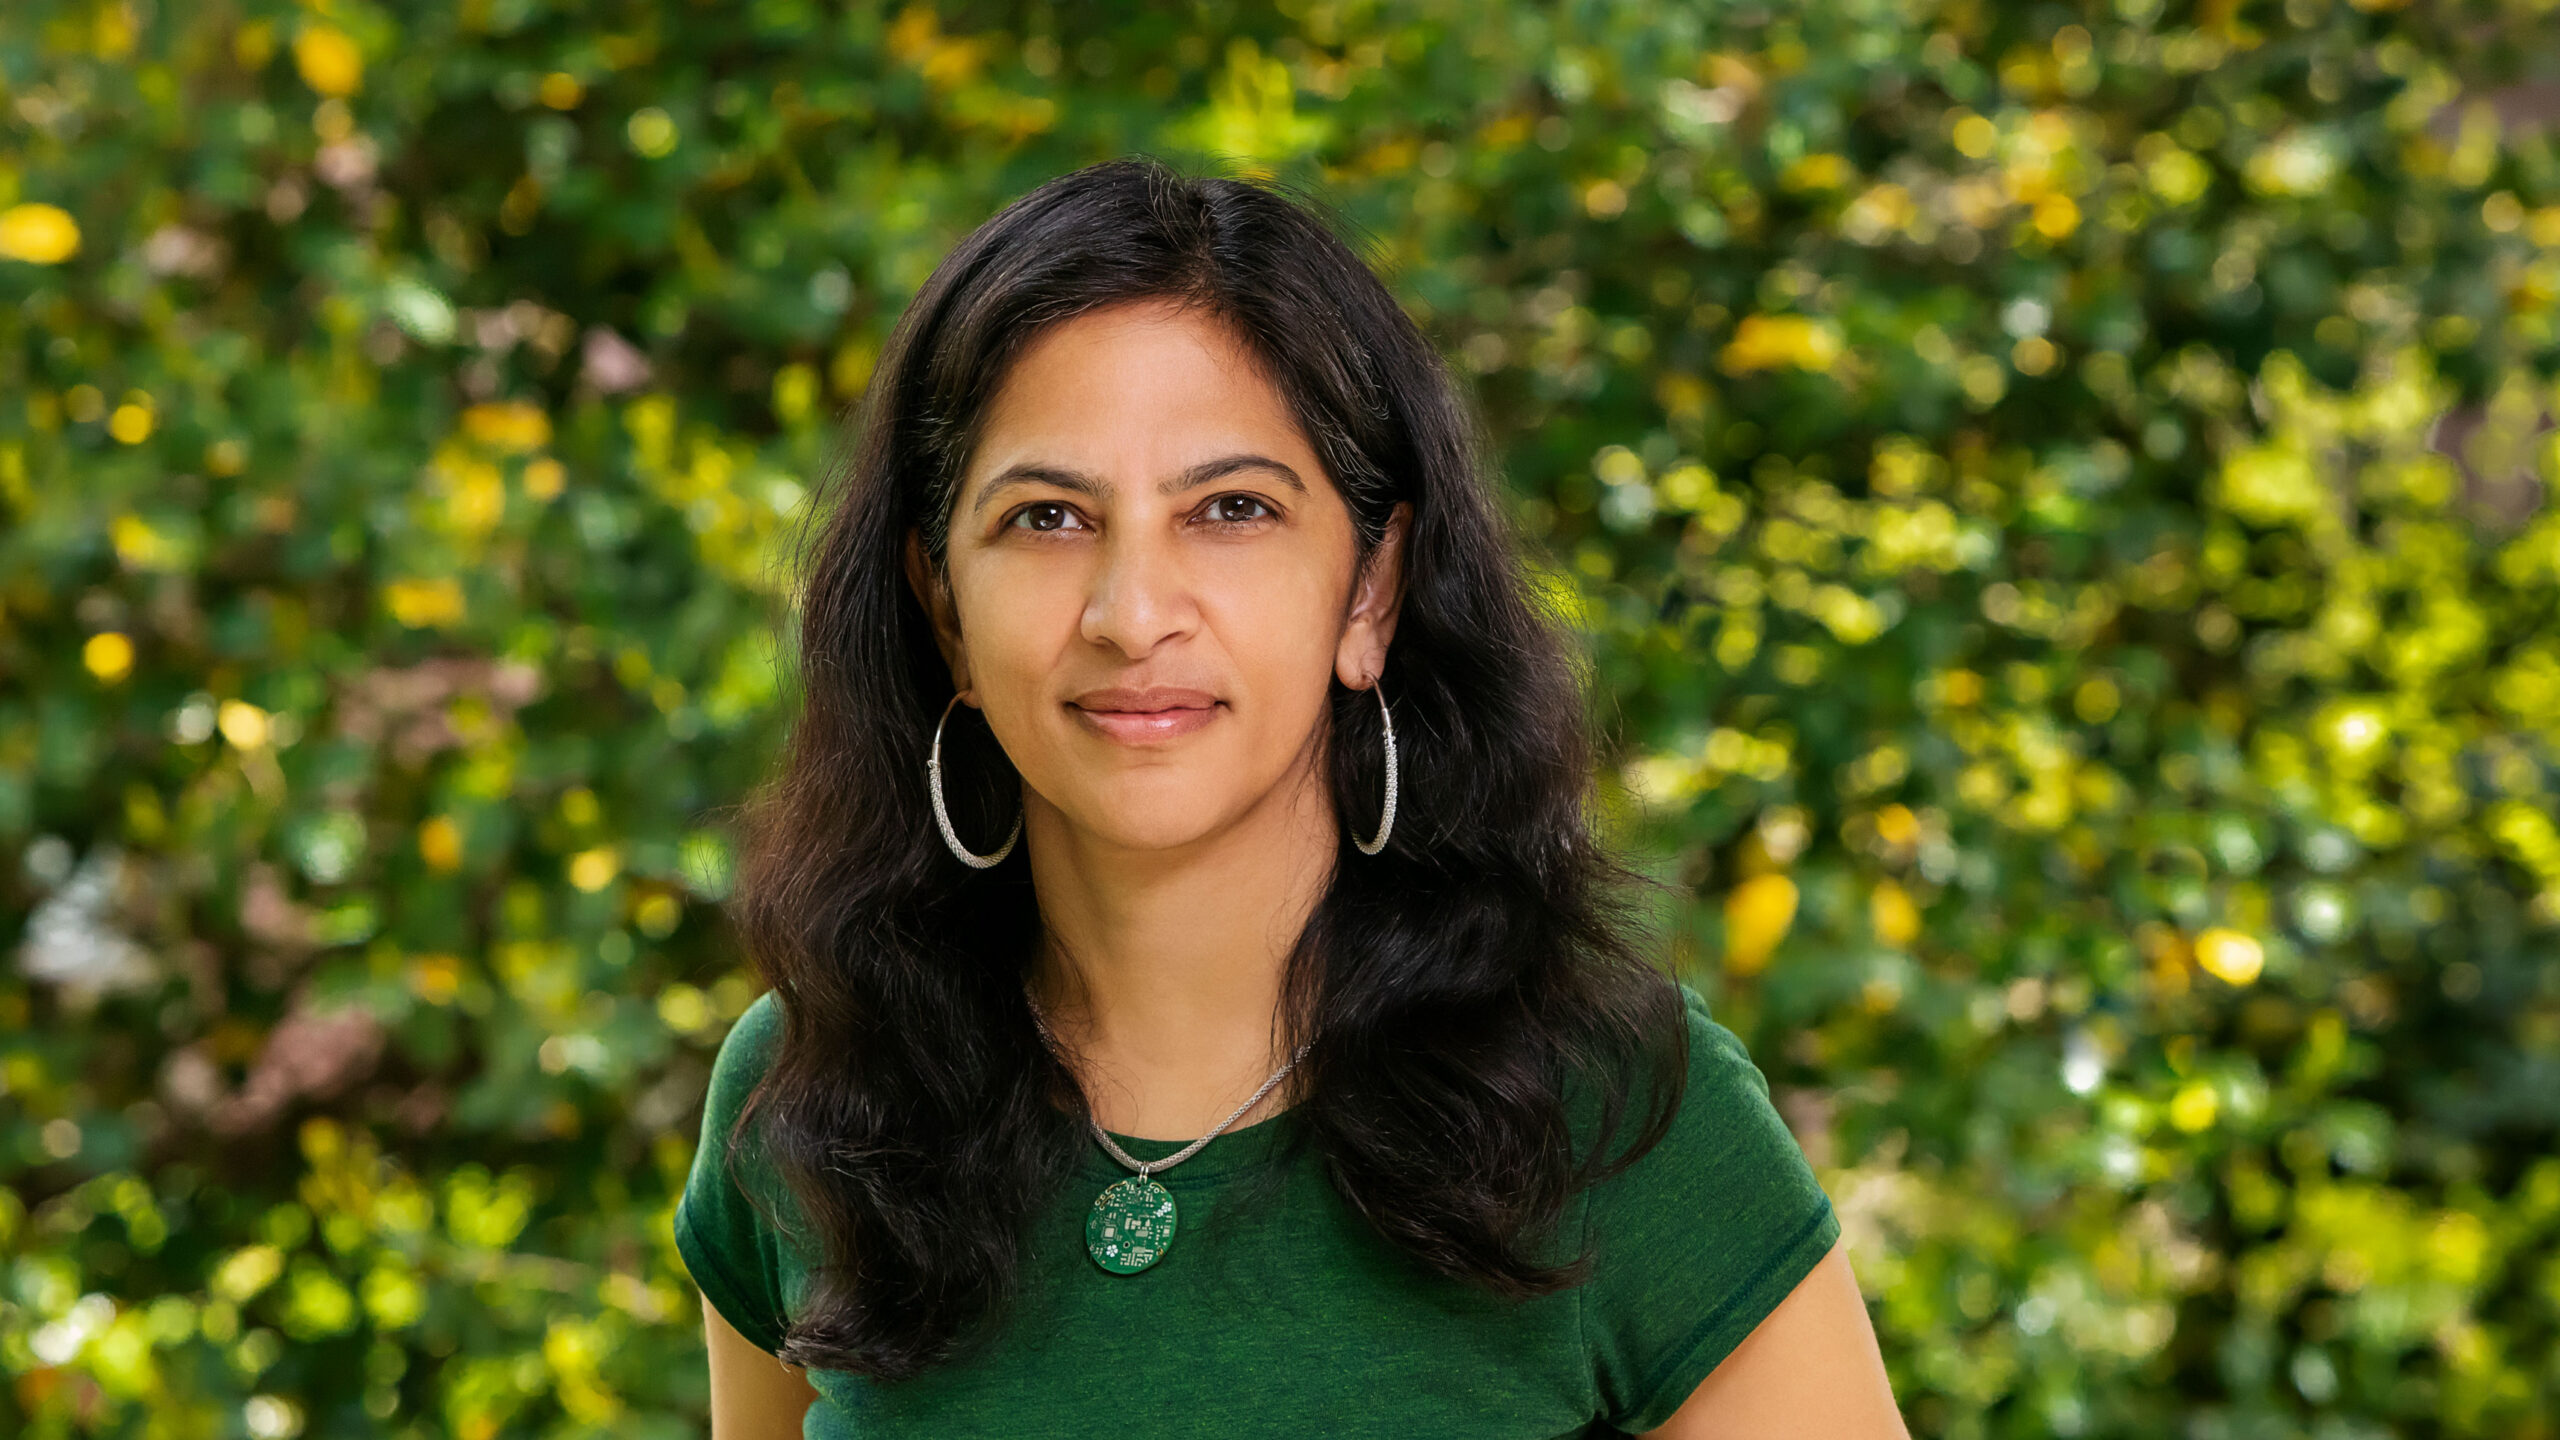 Head and shoulders photo of Radhika Nagpal in a green t-shirt standing in front of green foliage.